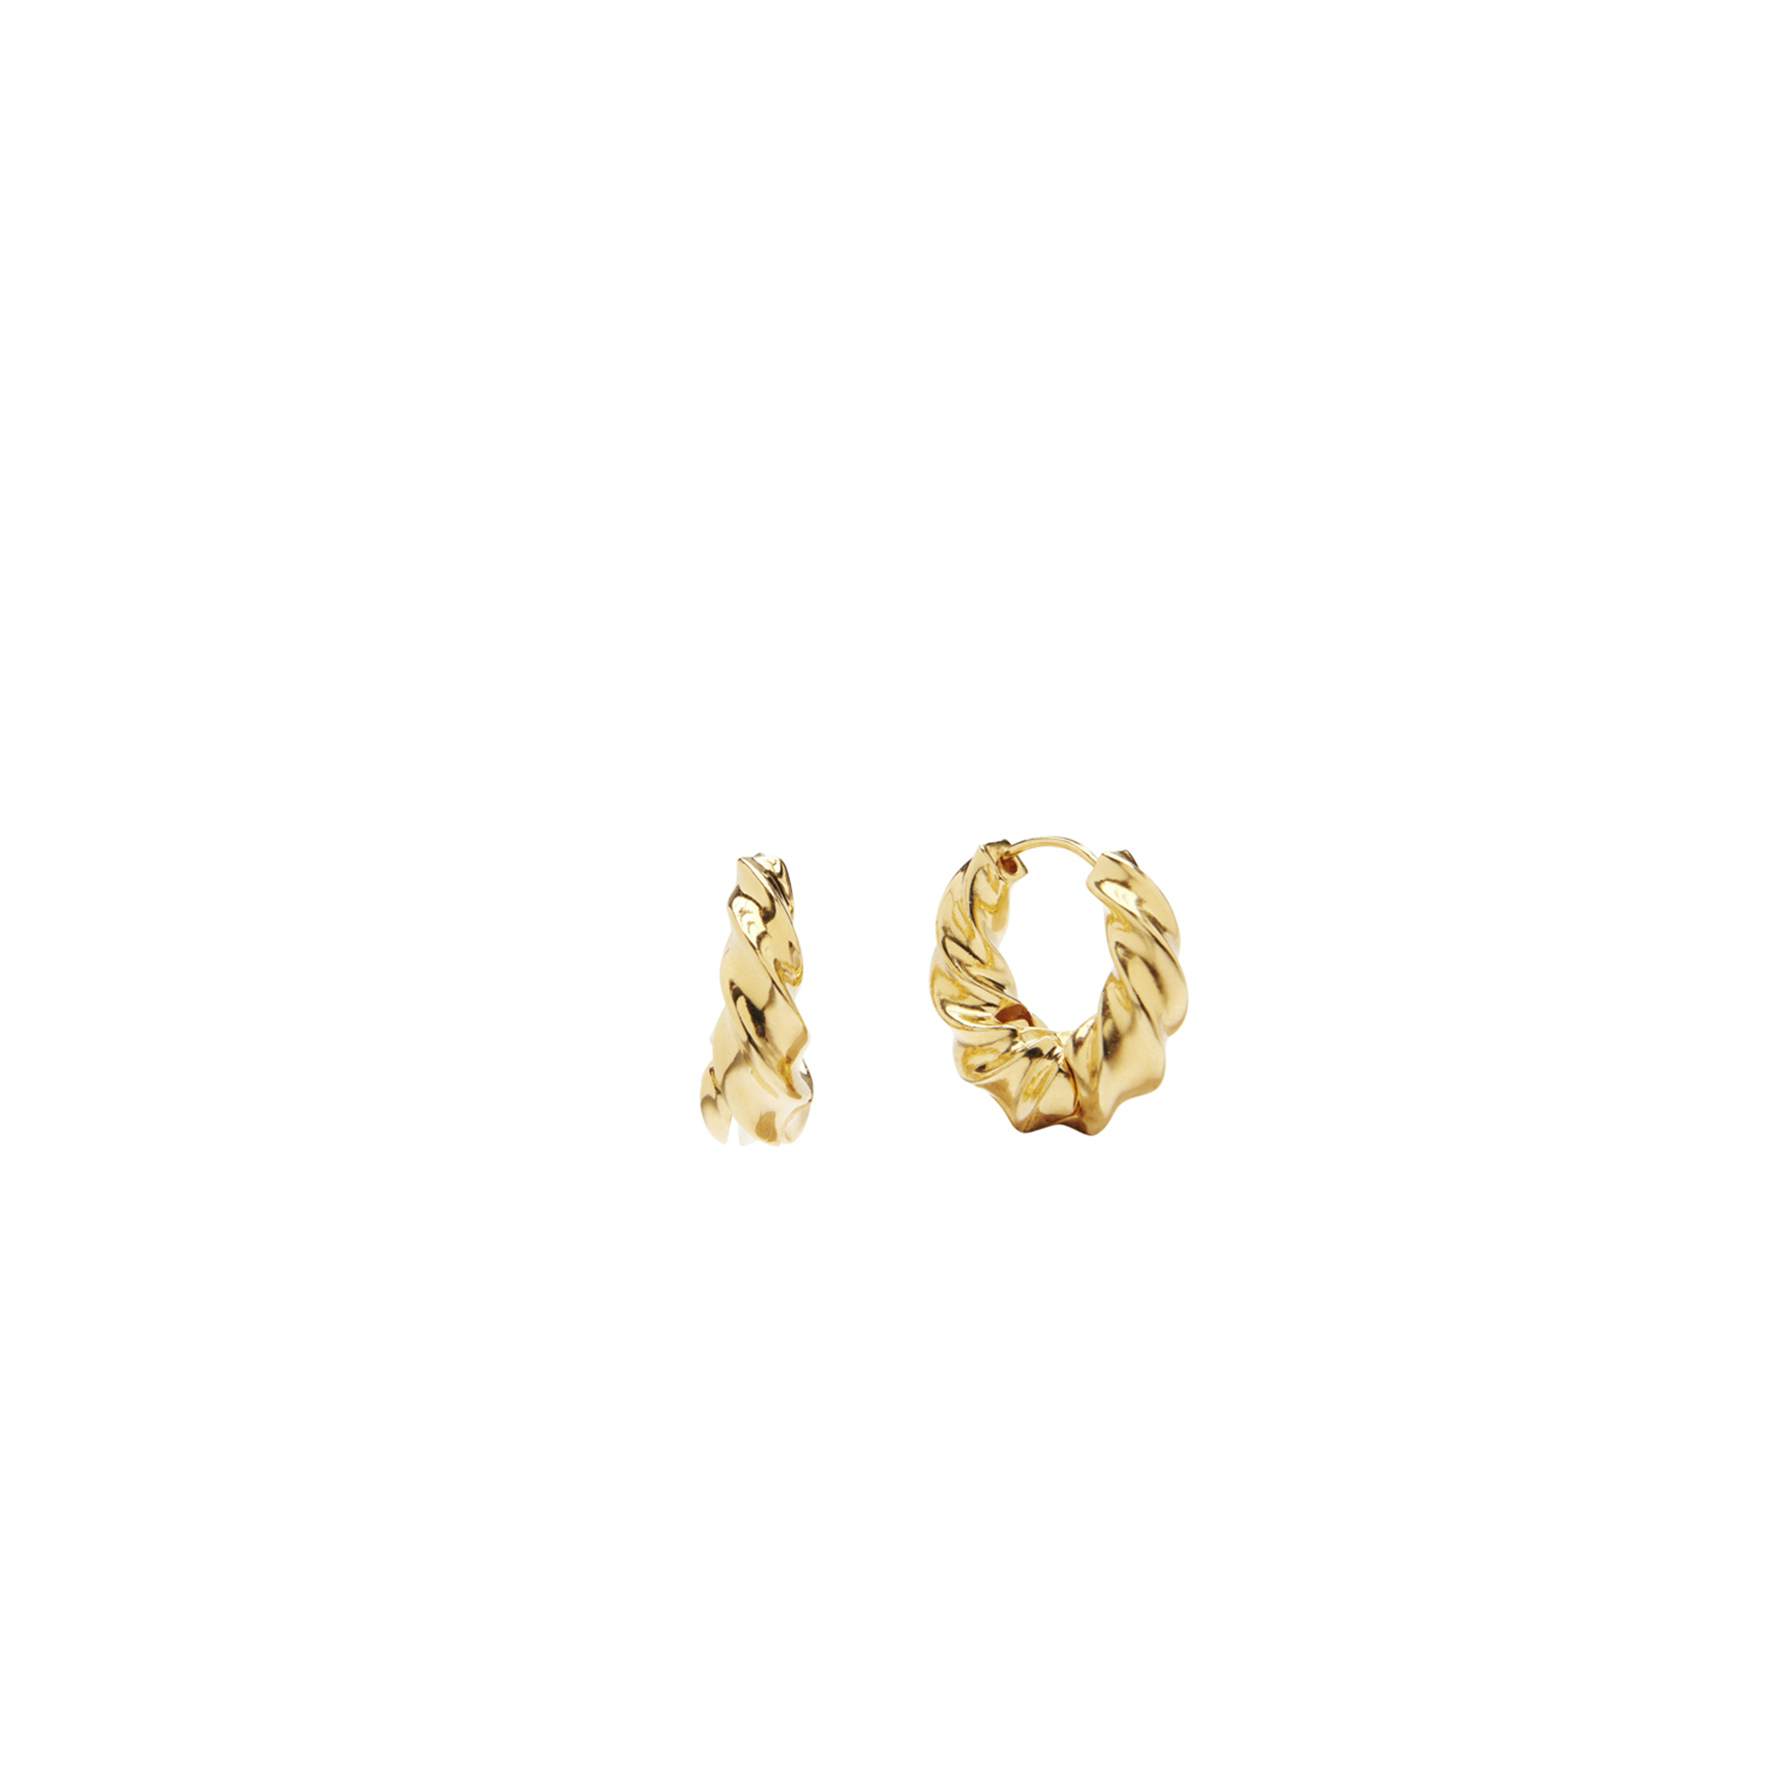 Ellie Hoops from Pico in Goldplated-Silver Sterling 925